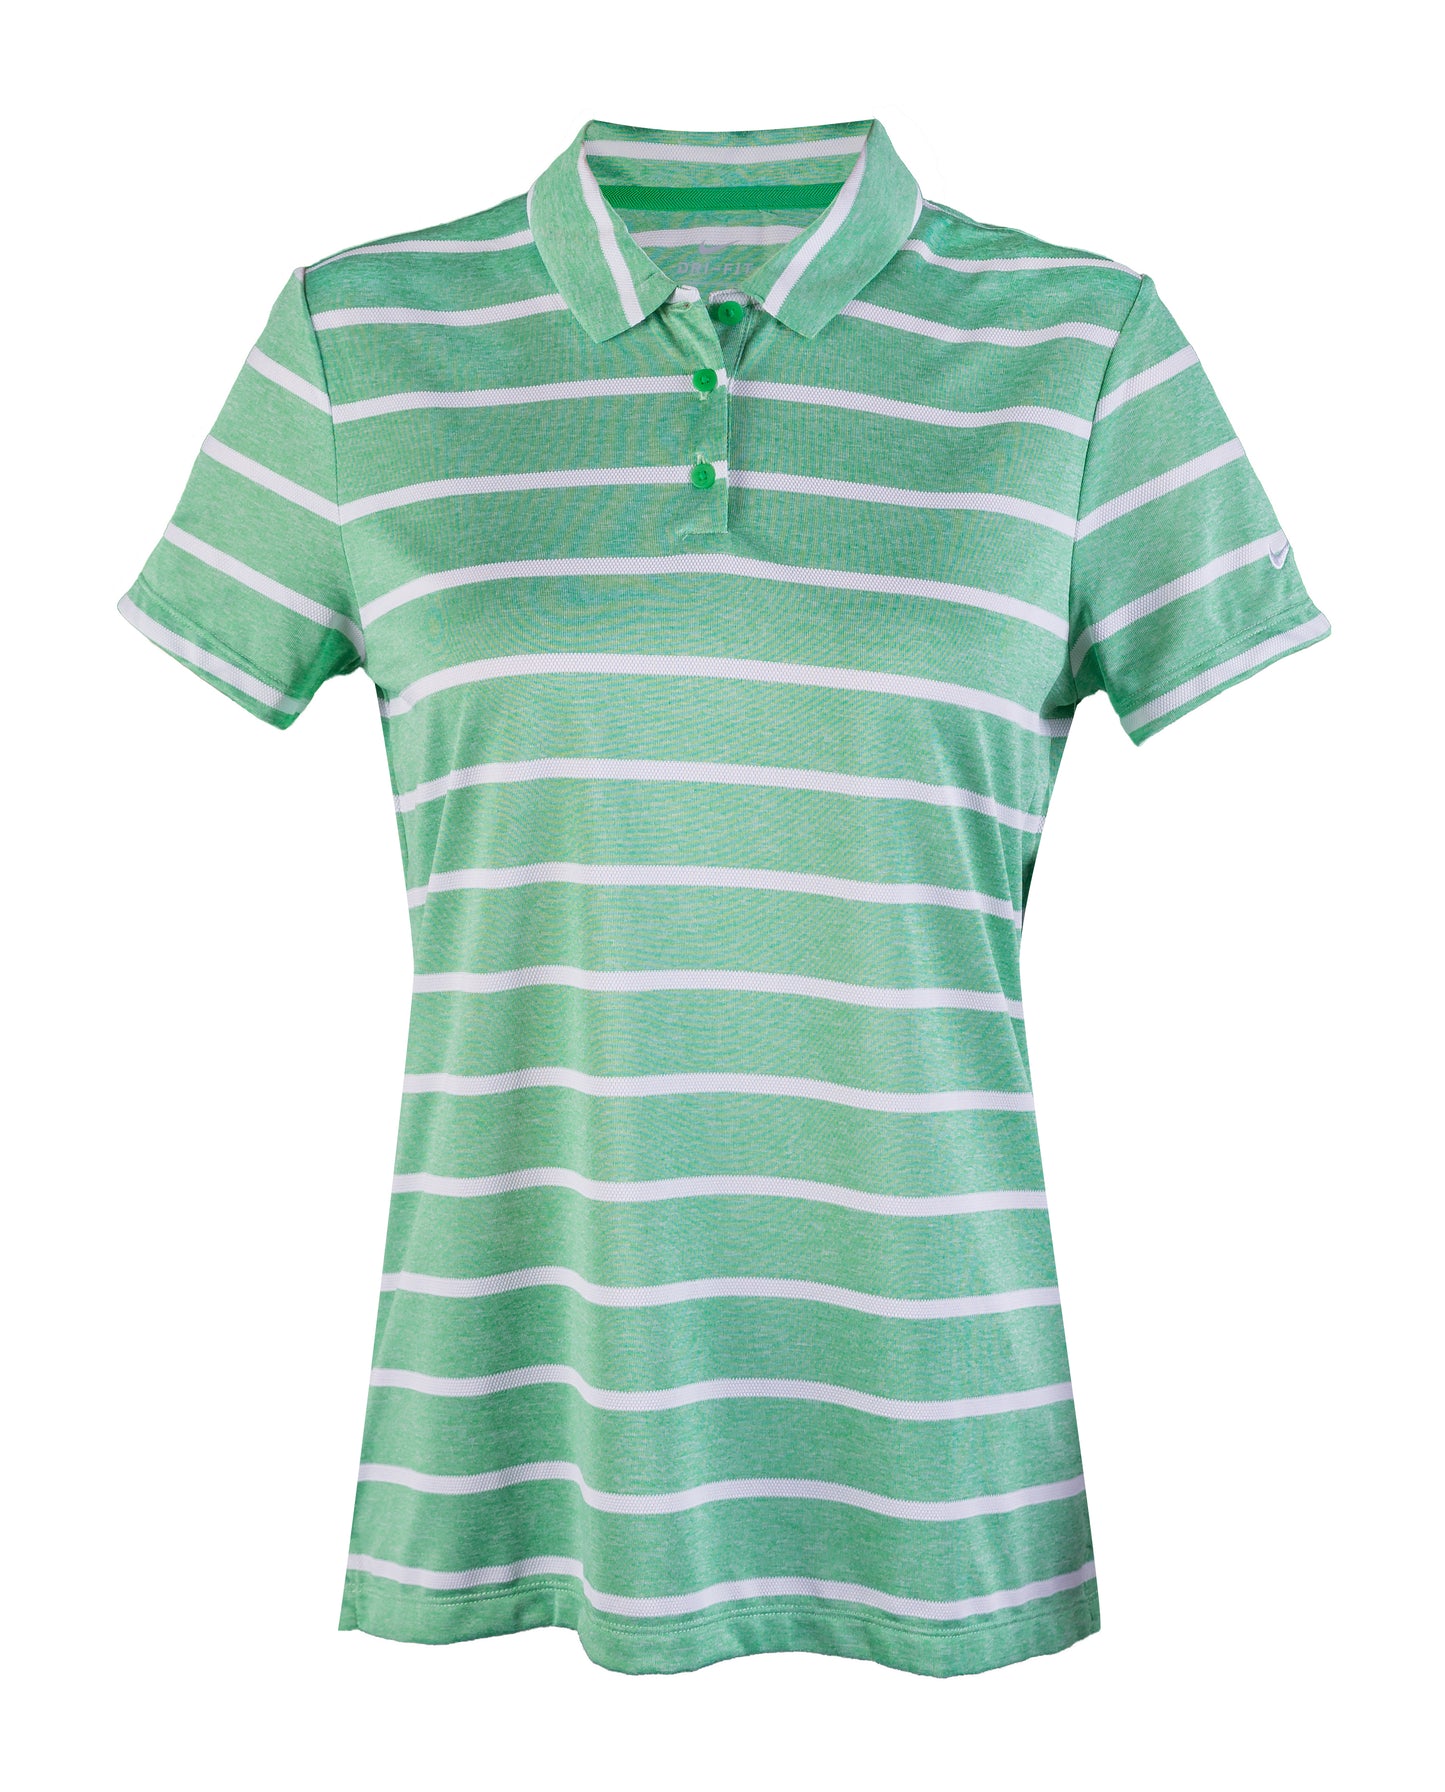 Women's Nike Striped Dry Fit Polo